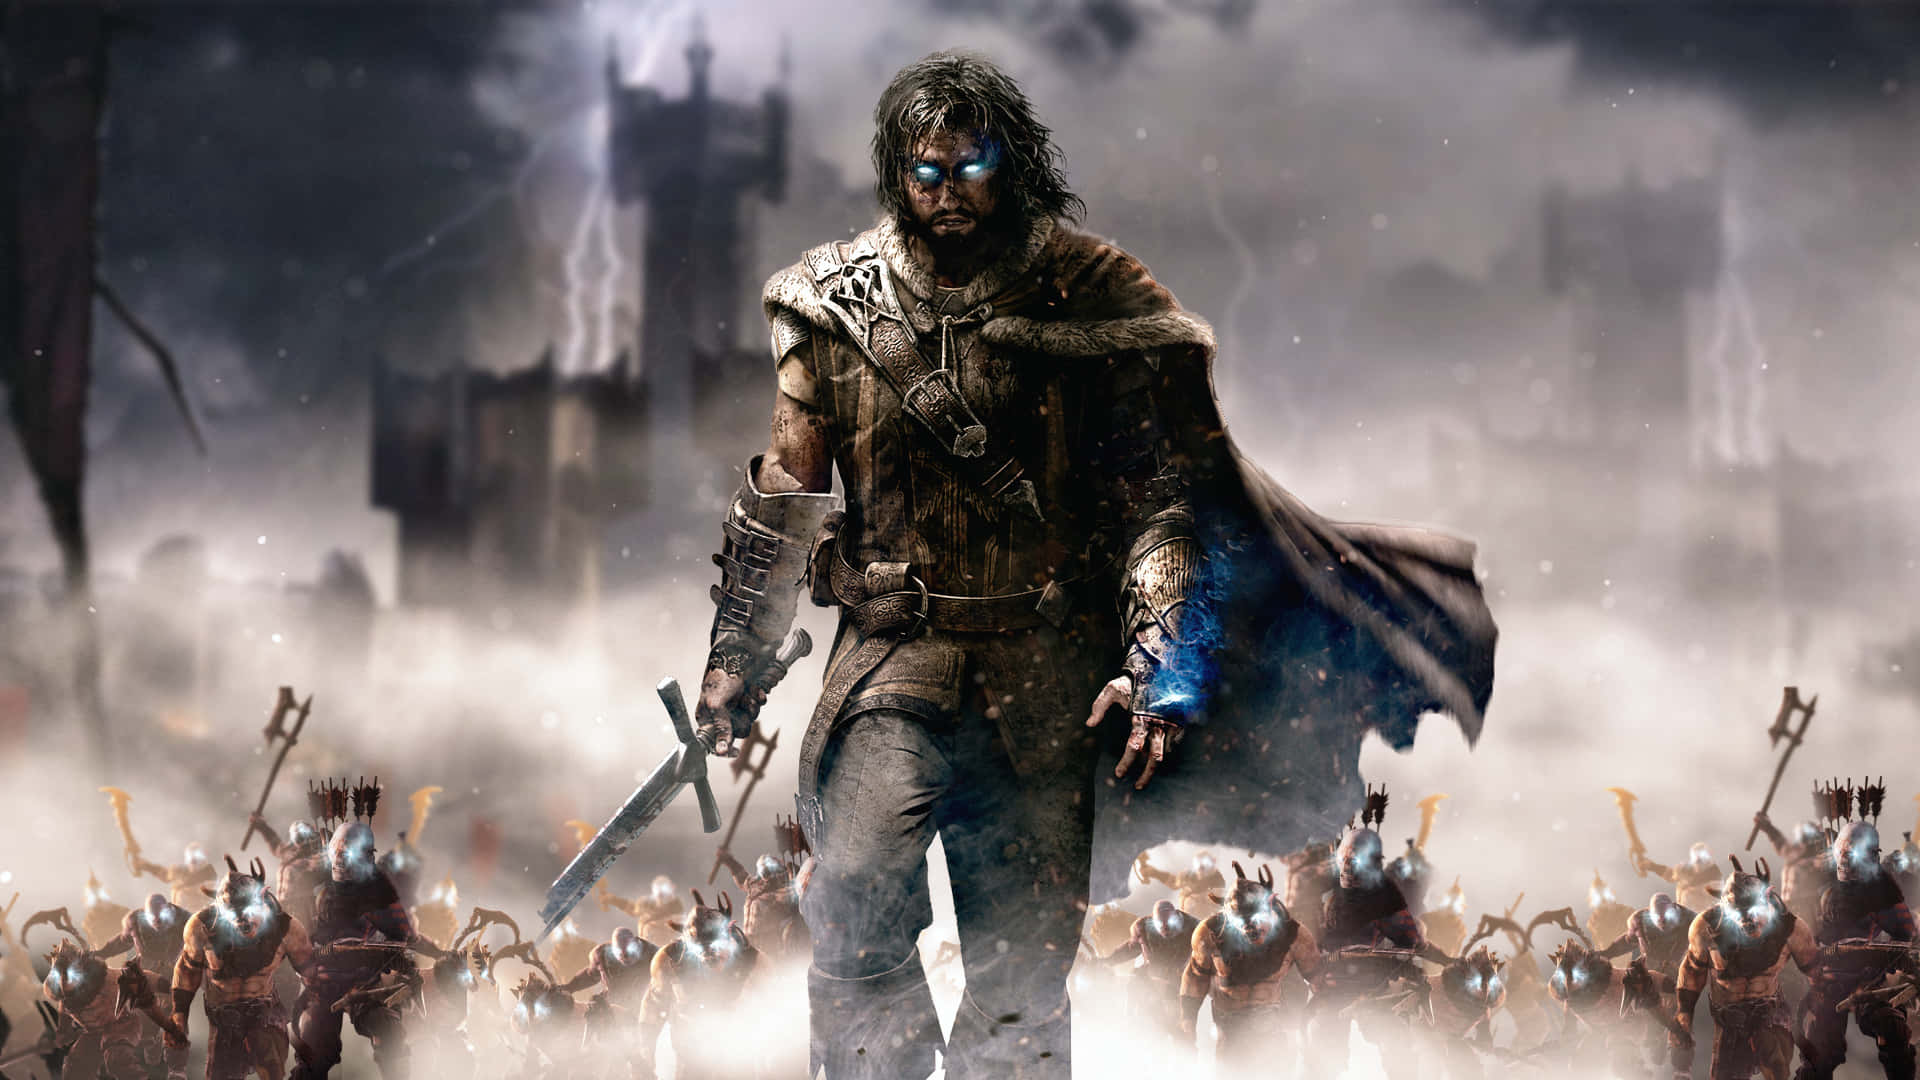 Best Shadow of Mordor: An Epic Action Role-Playing Game